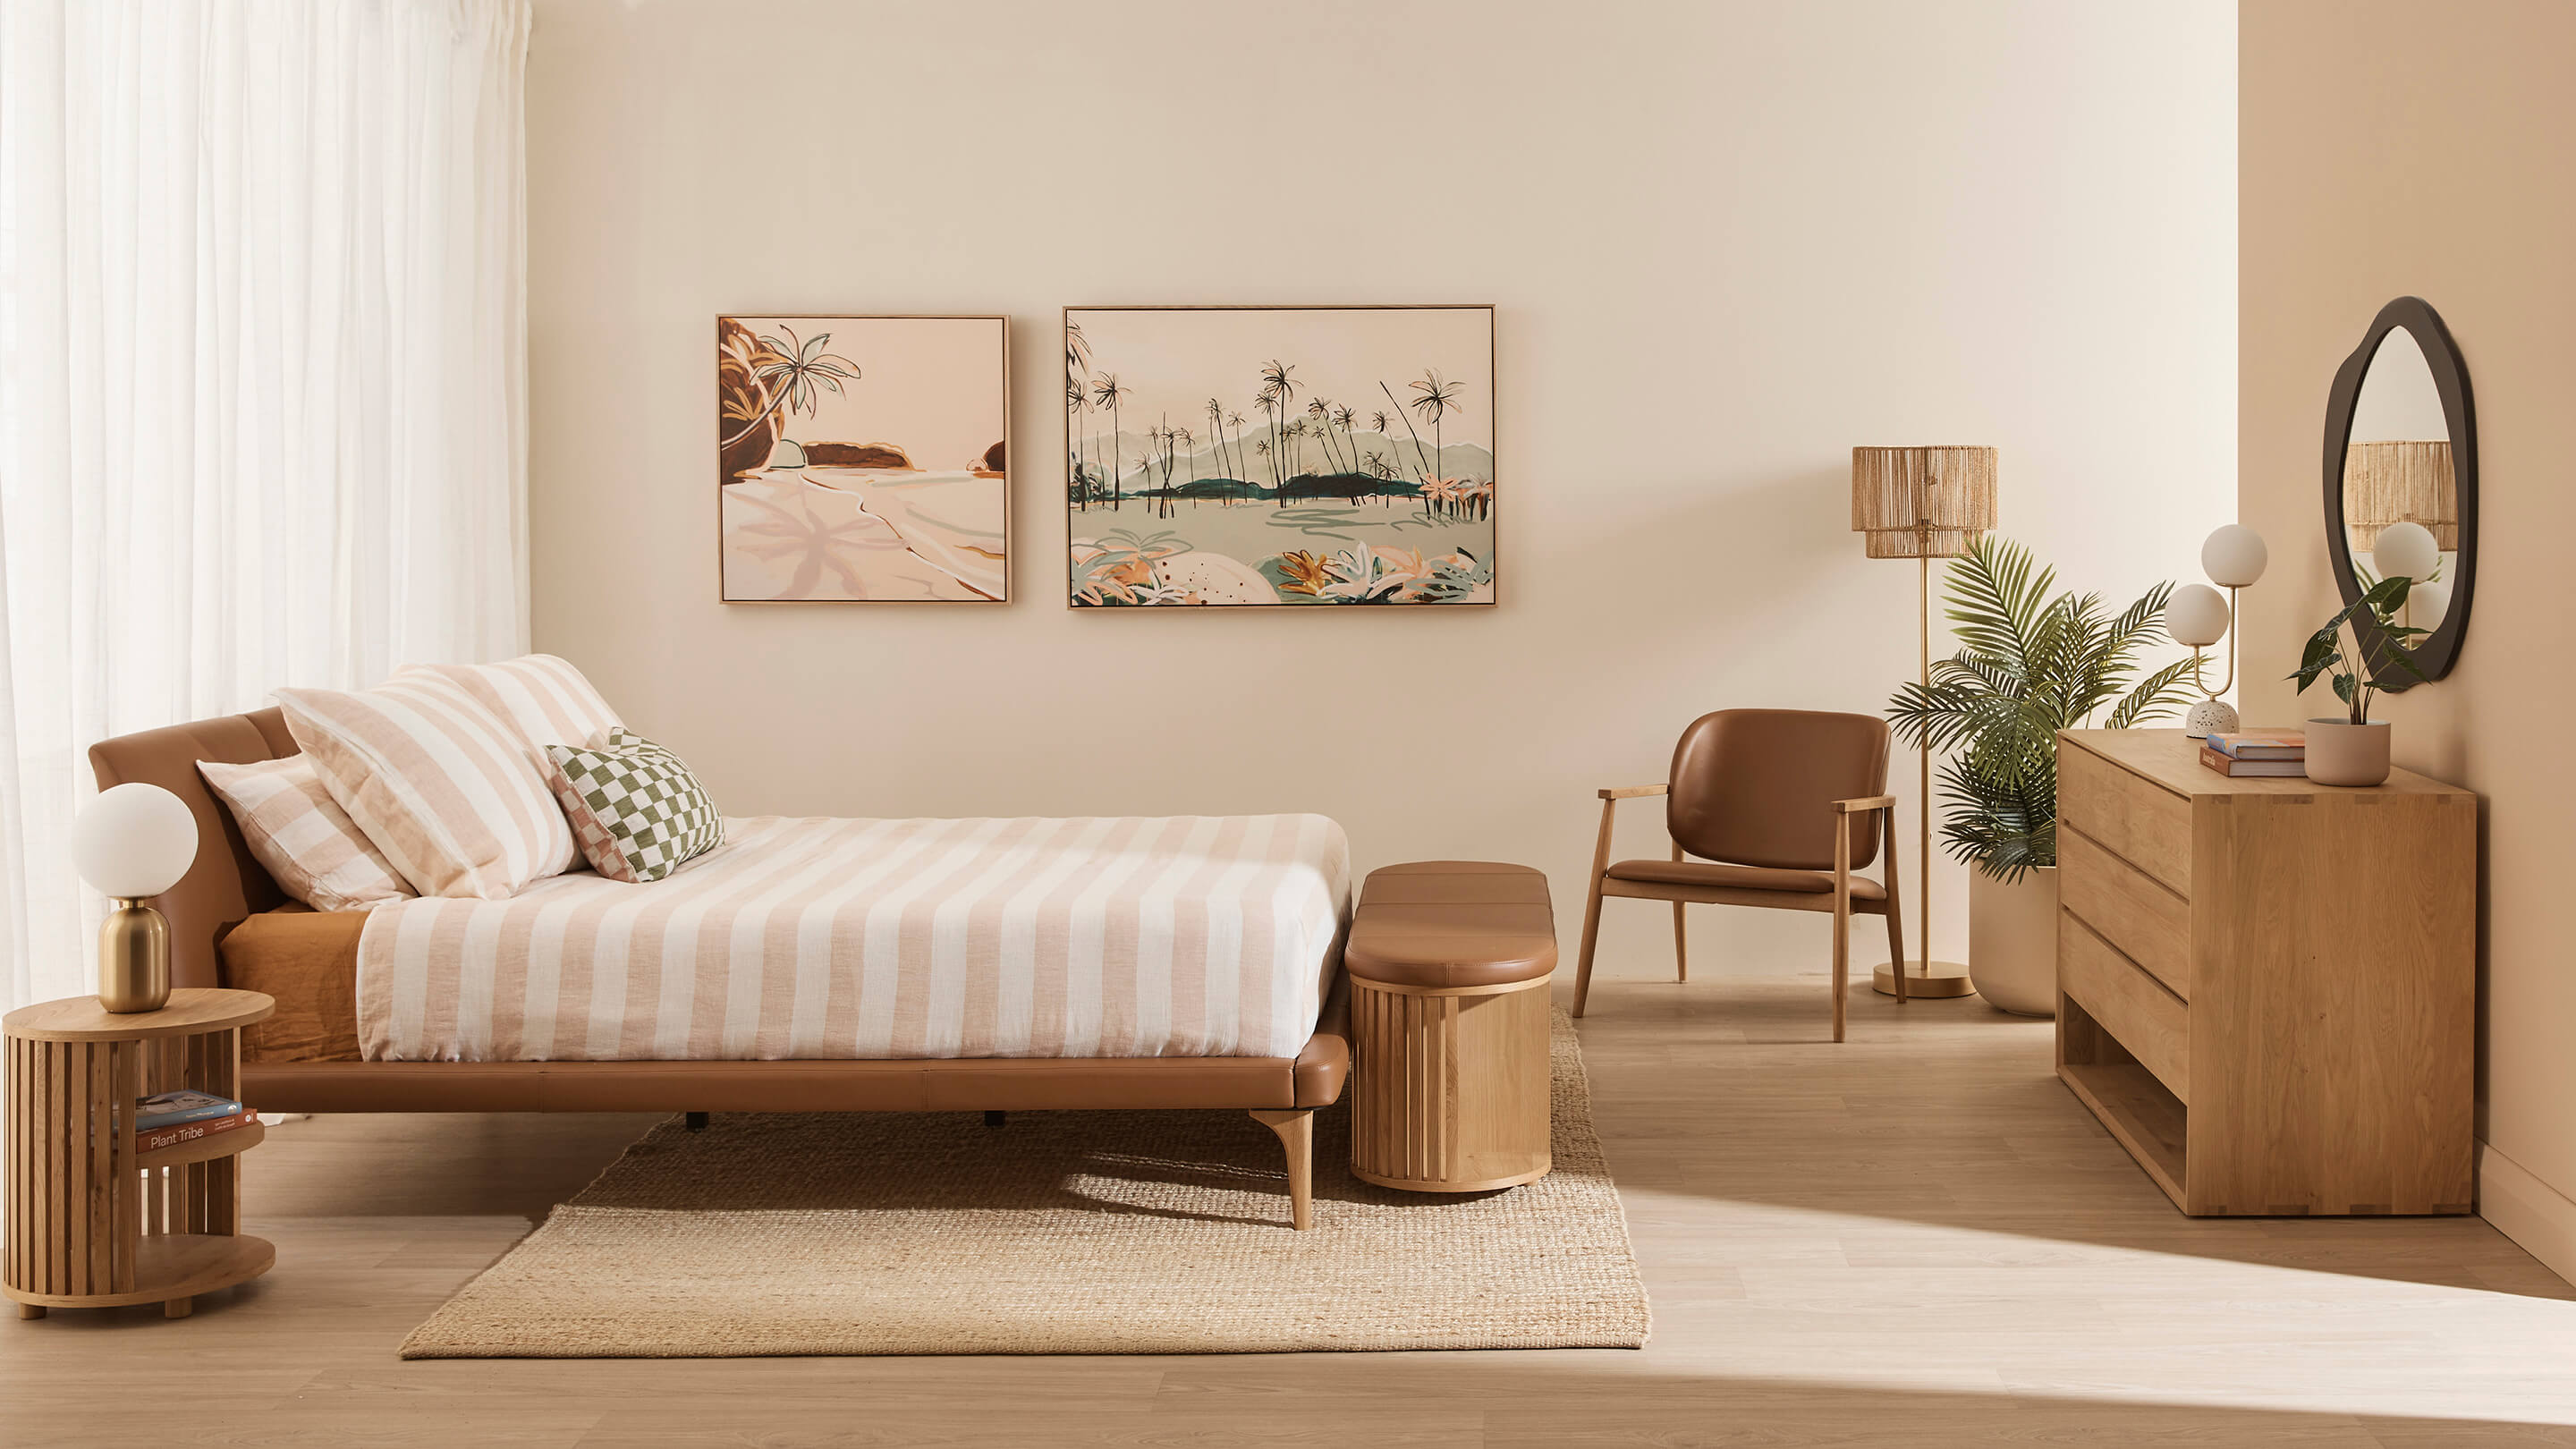 Introducing our Abode Spring Summer 22 collection, full of neutral yet fun living, dining, home office, and bedroom spaces. Shop the Atlanta leather bedroom collection online or in-store now!